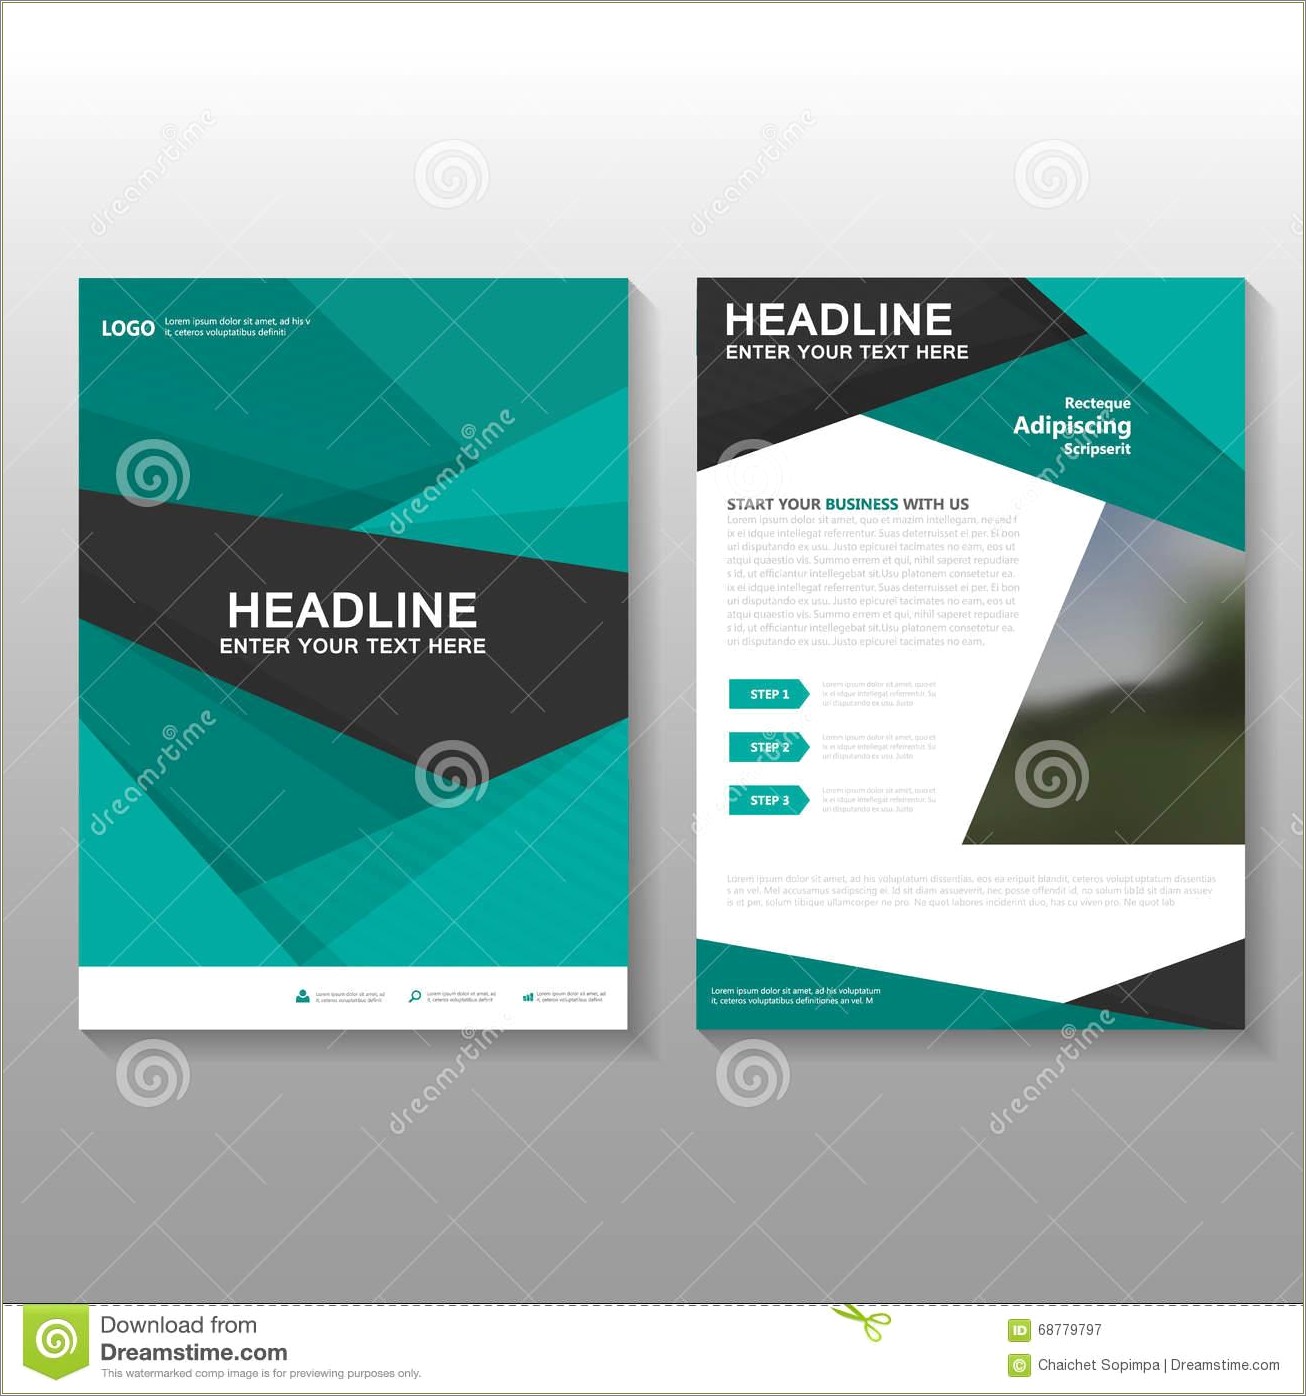 Business Proposal Design Template Free Download